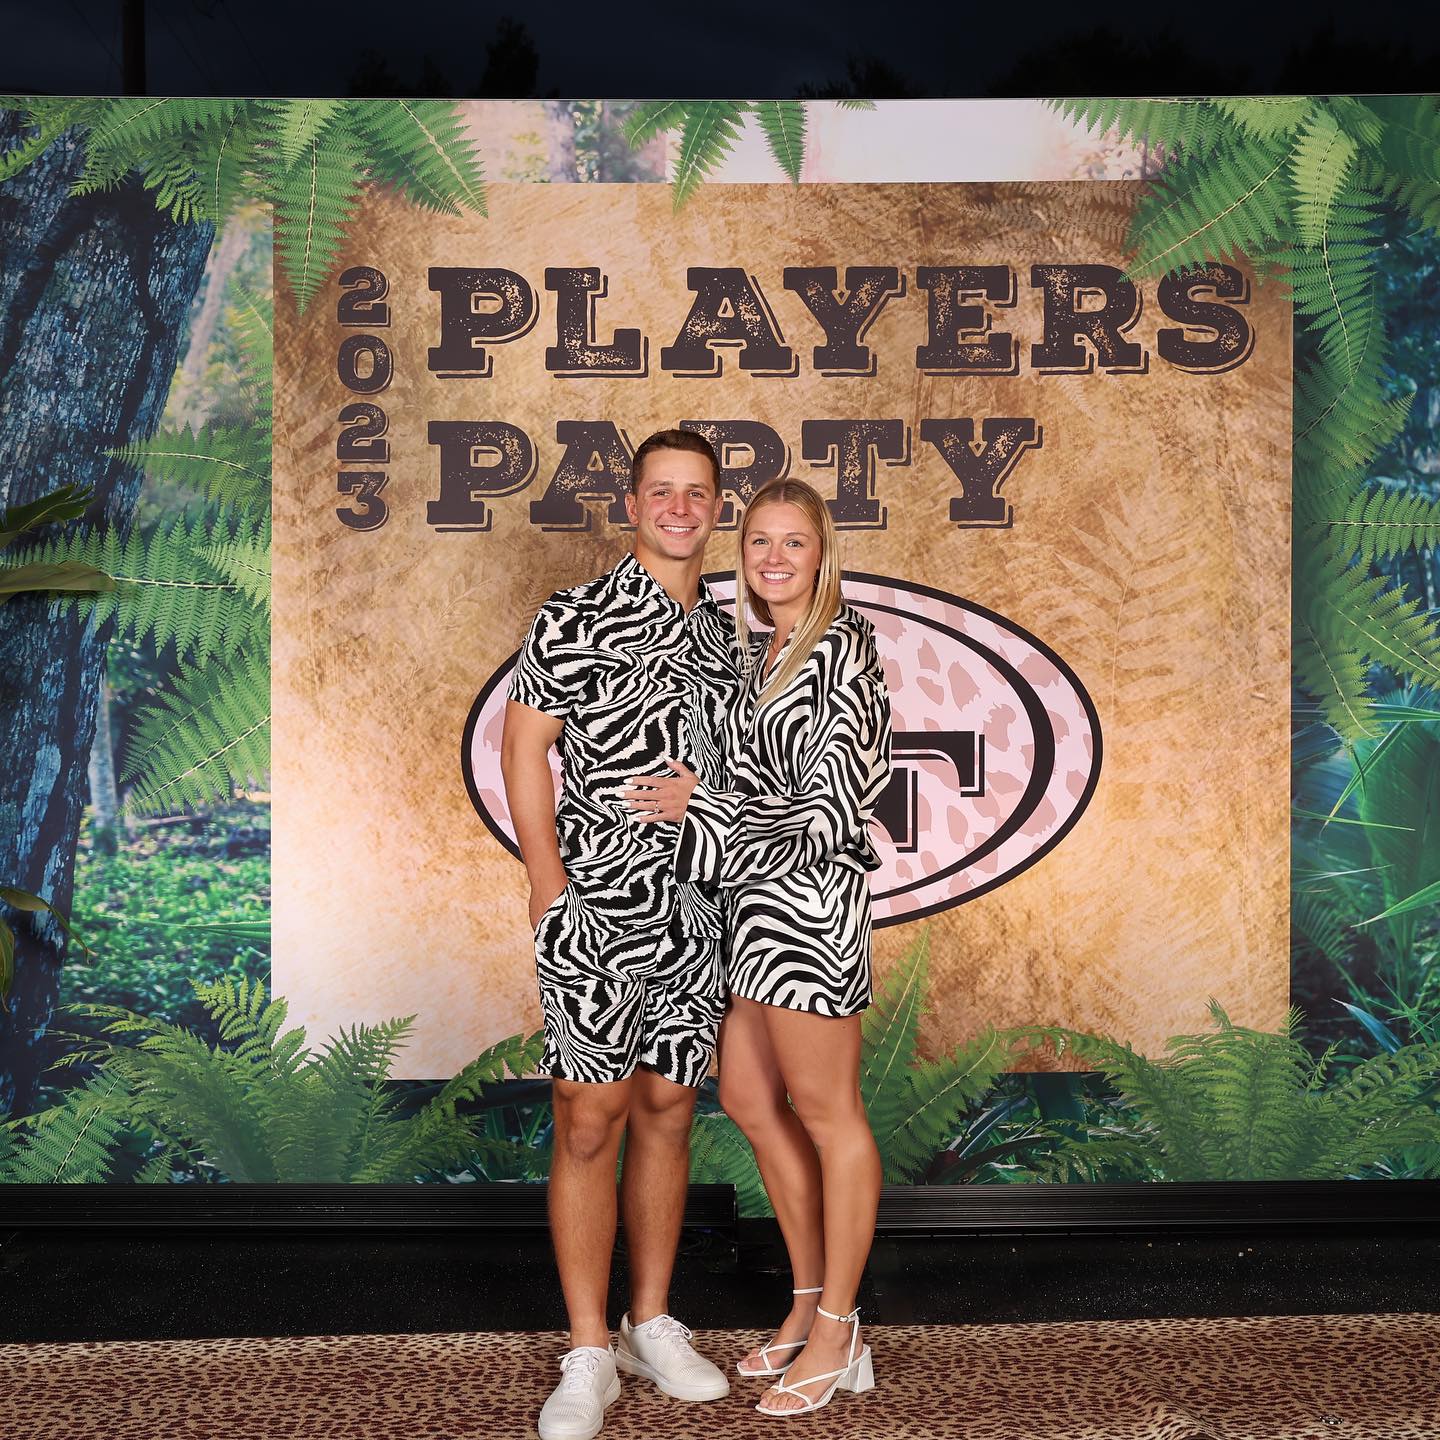 Brock Purdy with his future wife Jenna Brandt at the 2023 Players Party